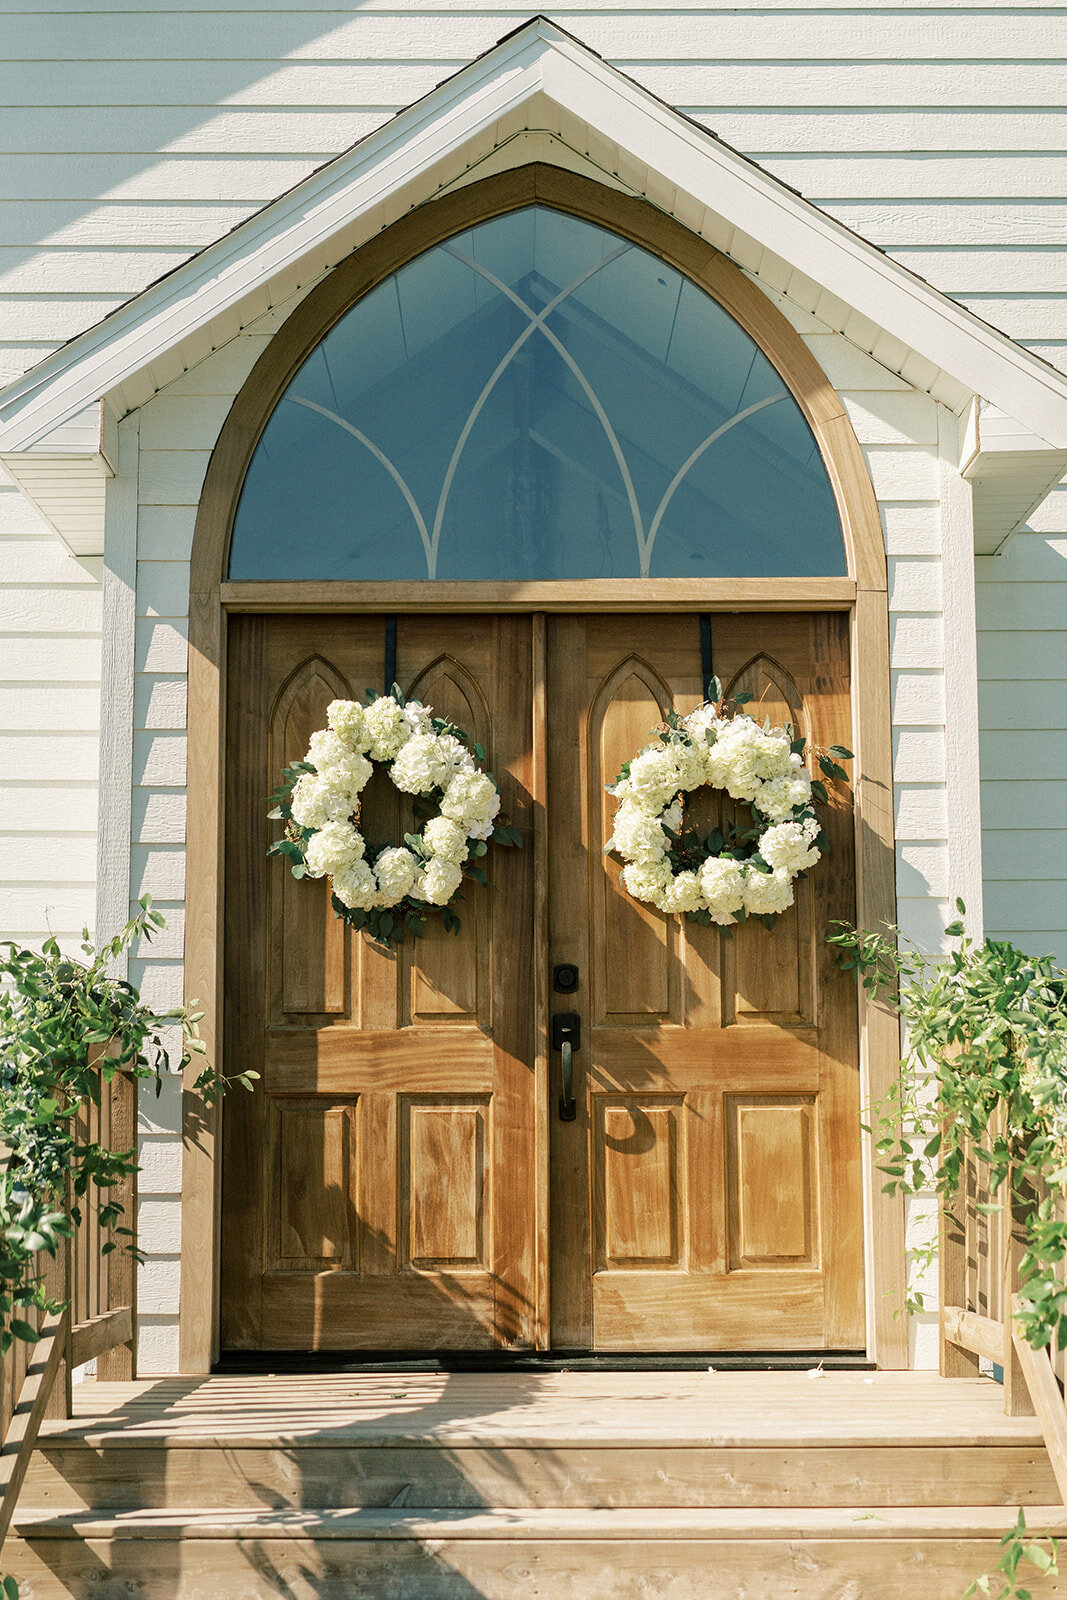 wooden church doors decorated with white floral wreaths